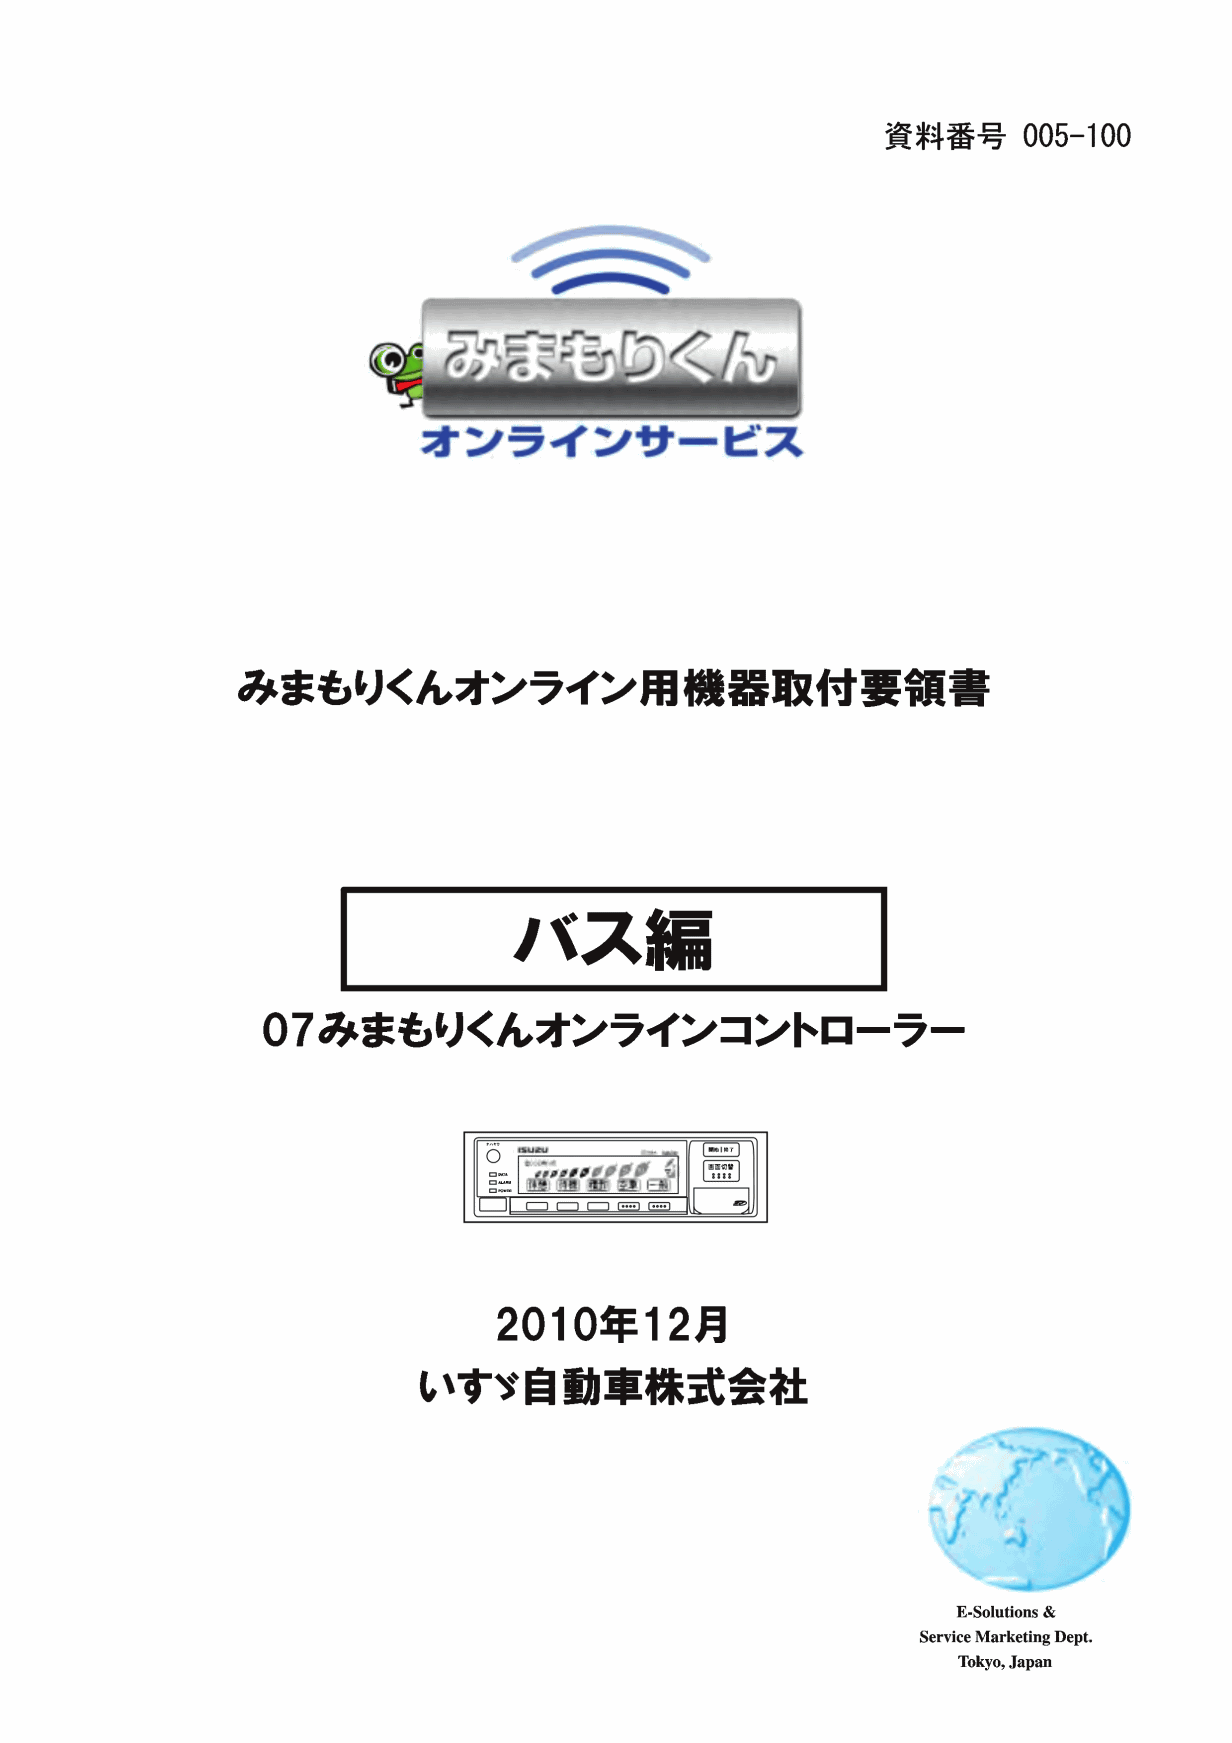 ISUZU WORKSHOP MANUALS for JAPANESE CARS and TRUCKS and BUSES